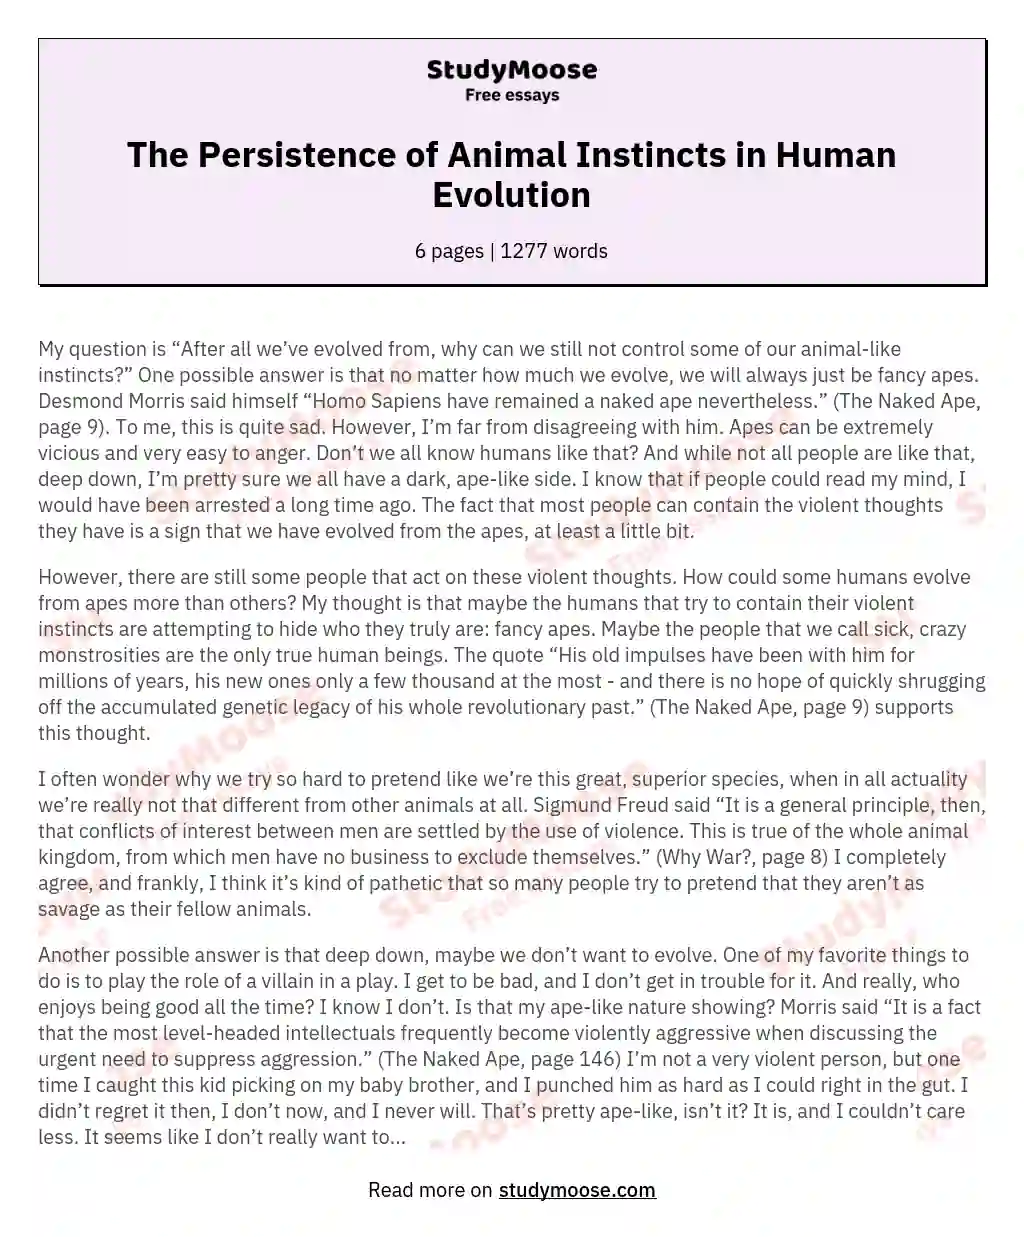 The Persistence of Animal Instincts in Human Evolution essay